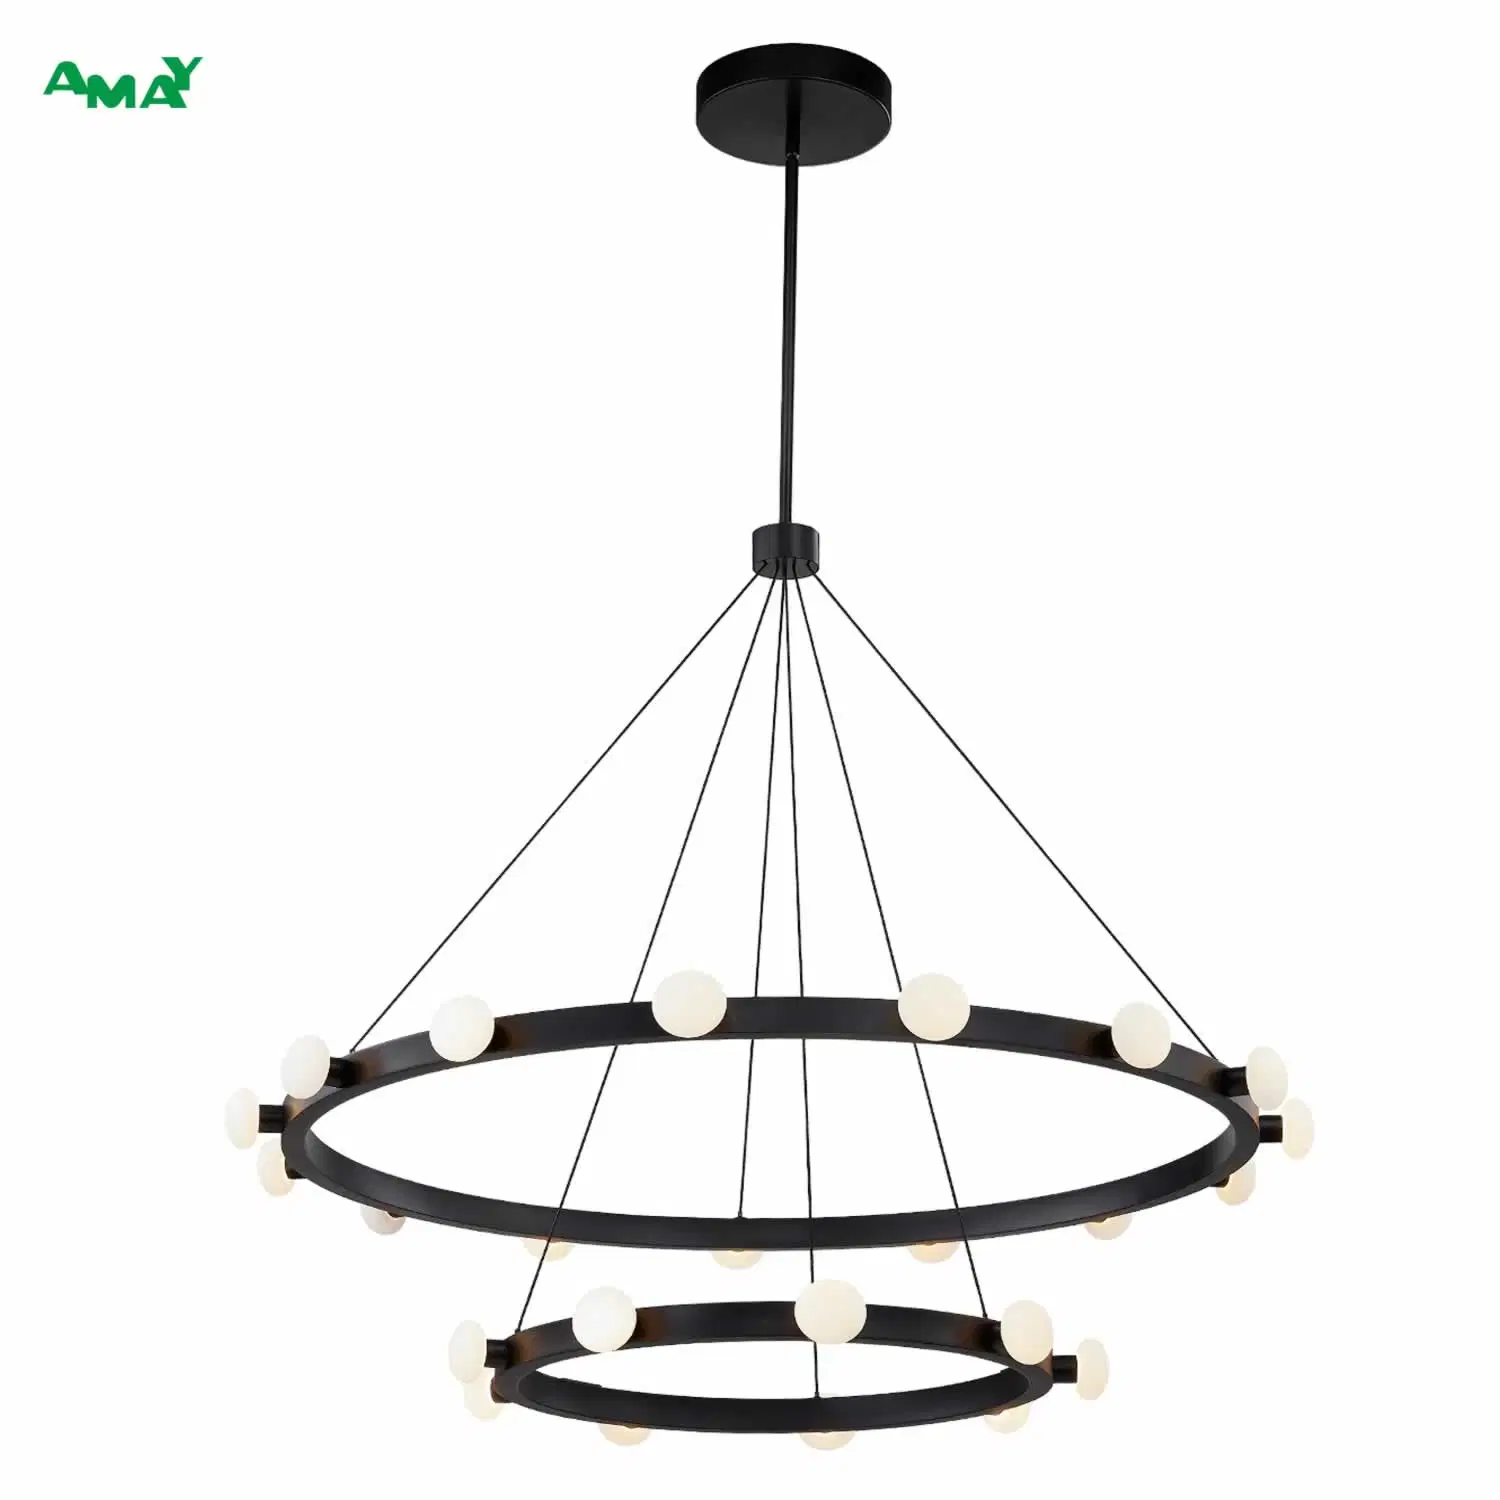 Hollywood Style Two tiers Glass Simple Home Decotation suspenso suspenso suspenso suspenso Lâmpada